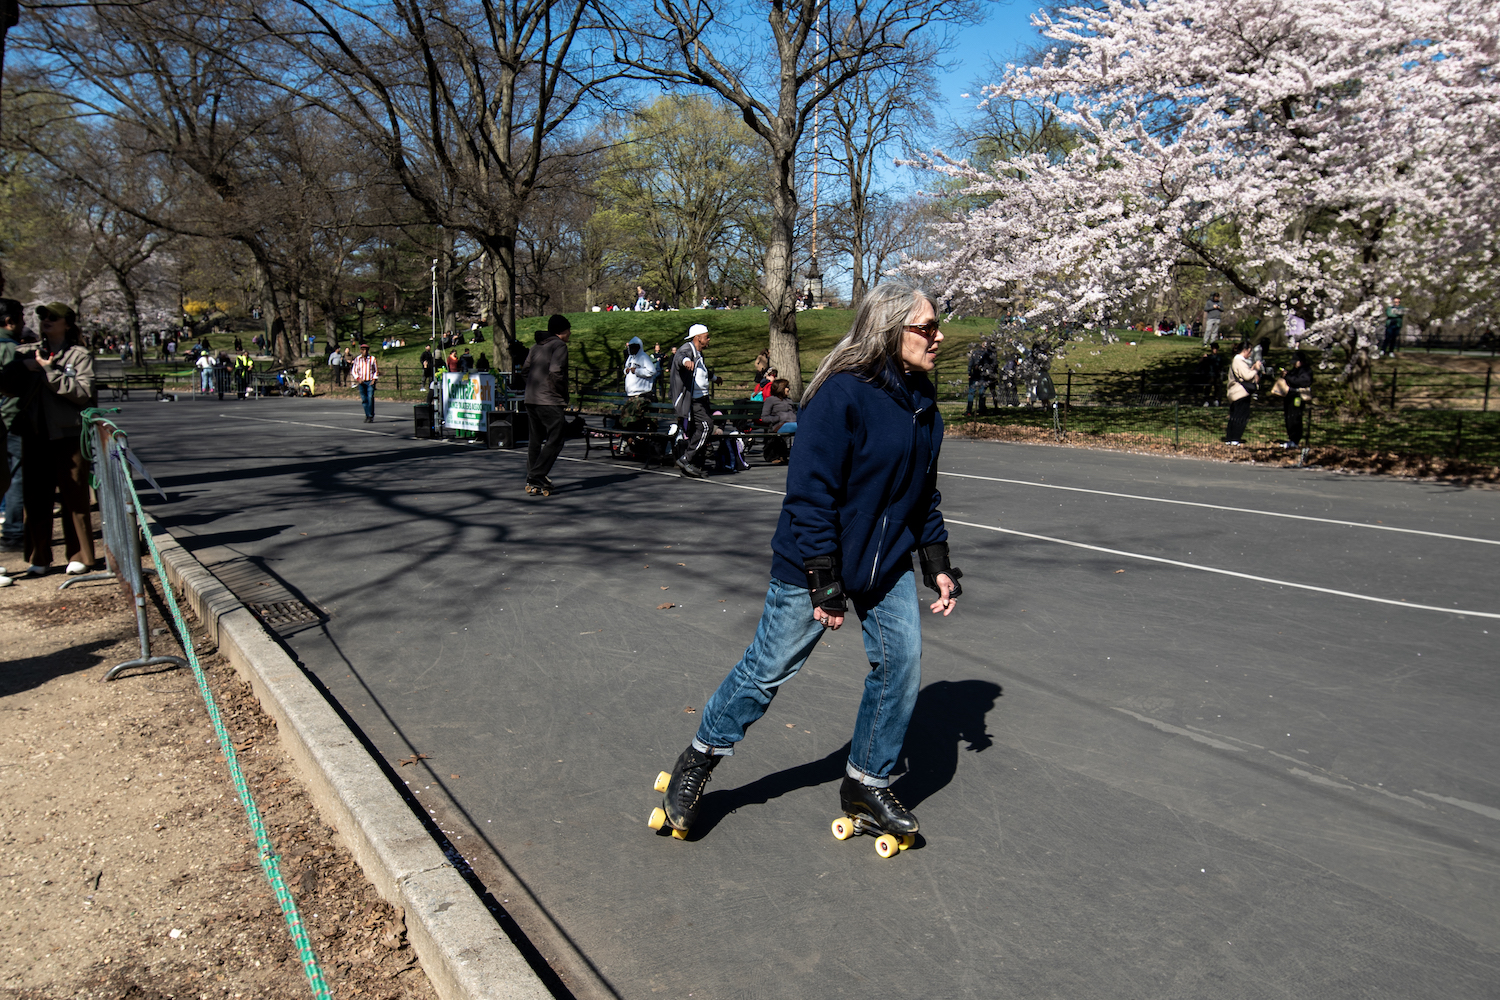 A person with long gray hair wears sunglasses, a navy blue jacket and blue jeans while roller skating in Central Park on a sunny day.